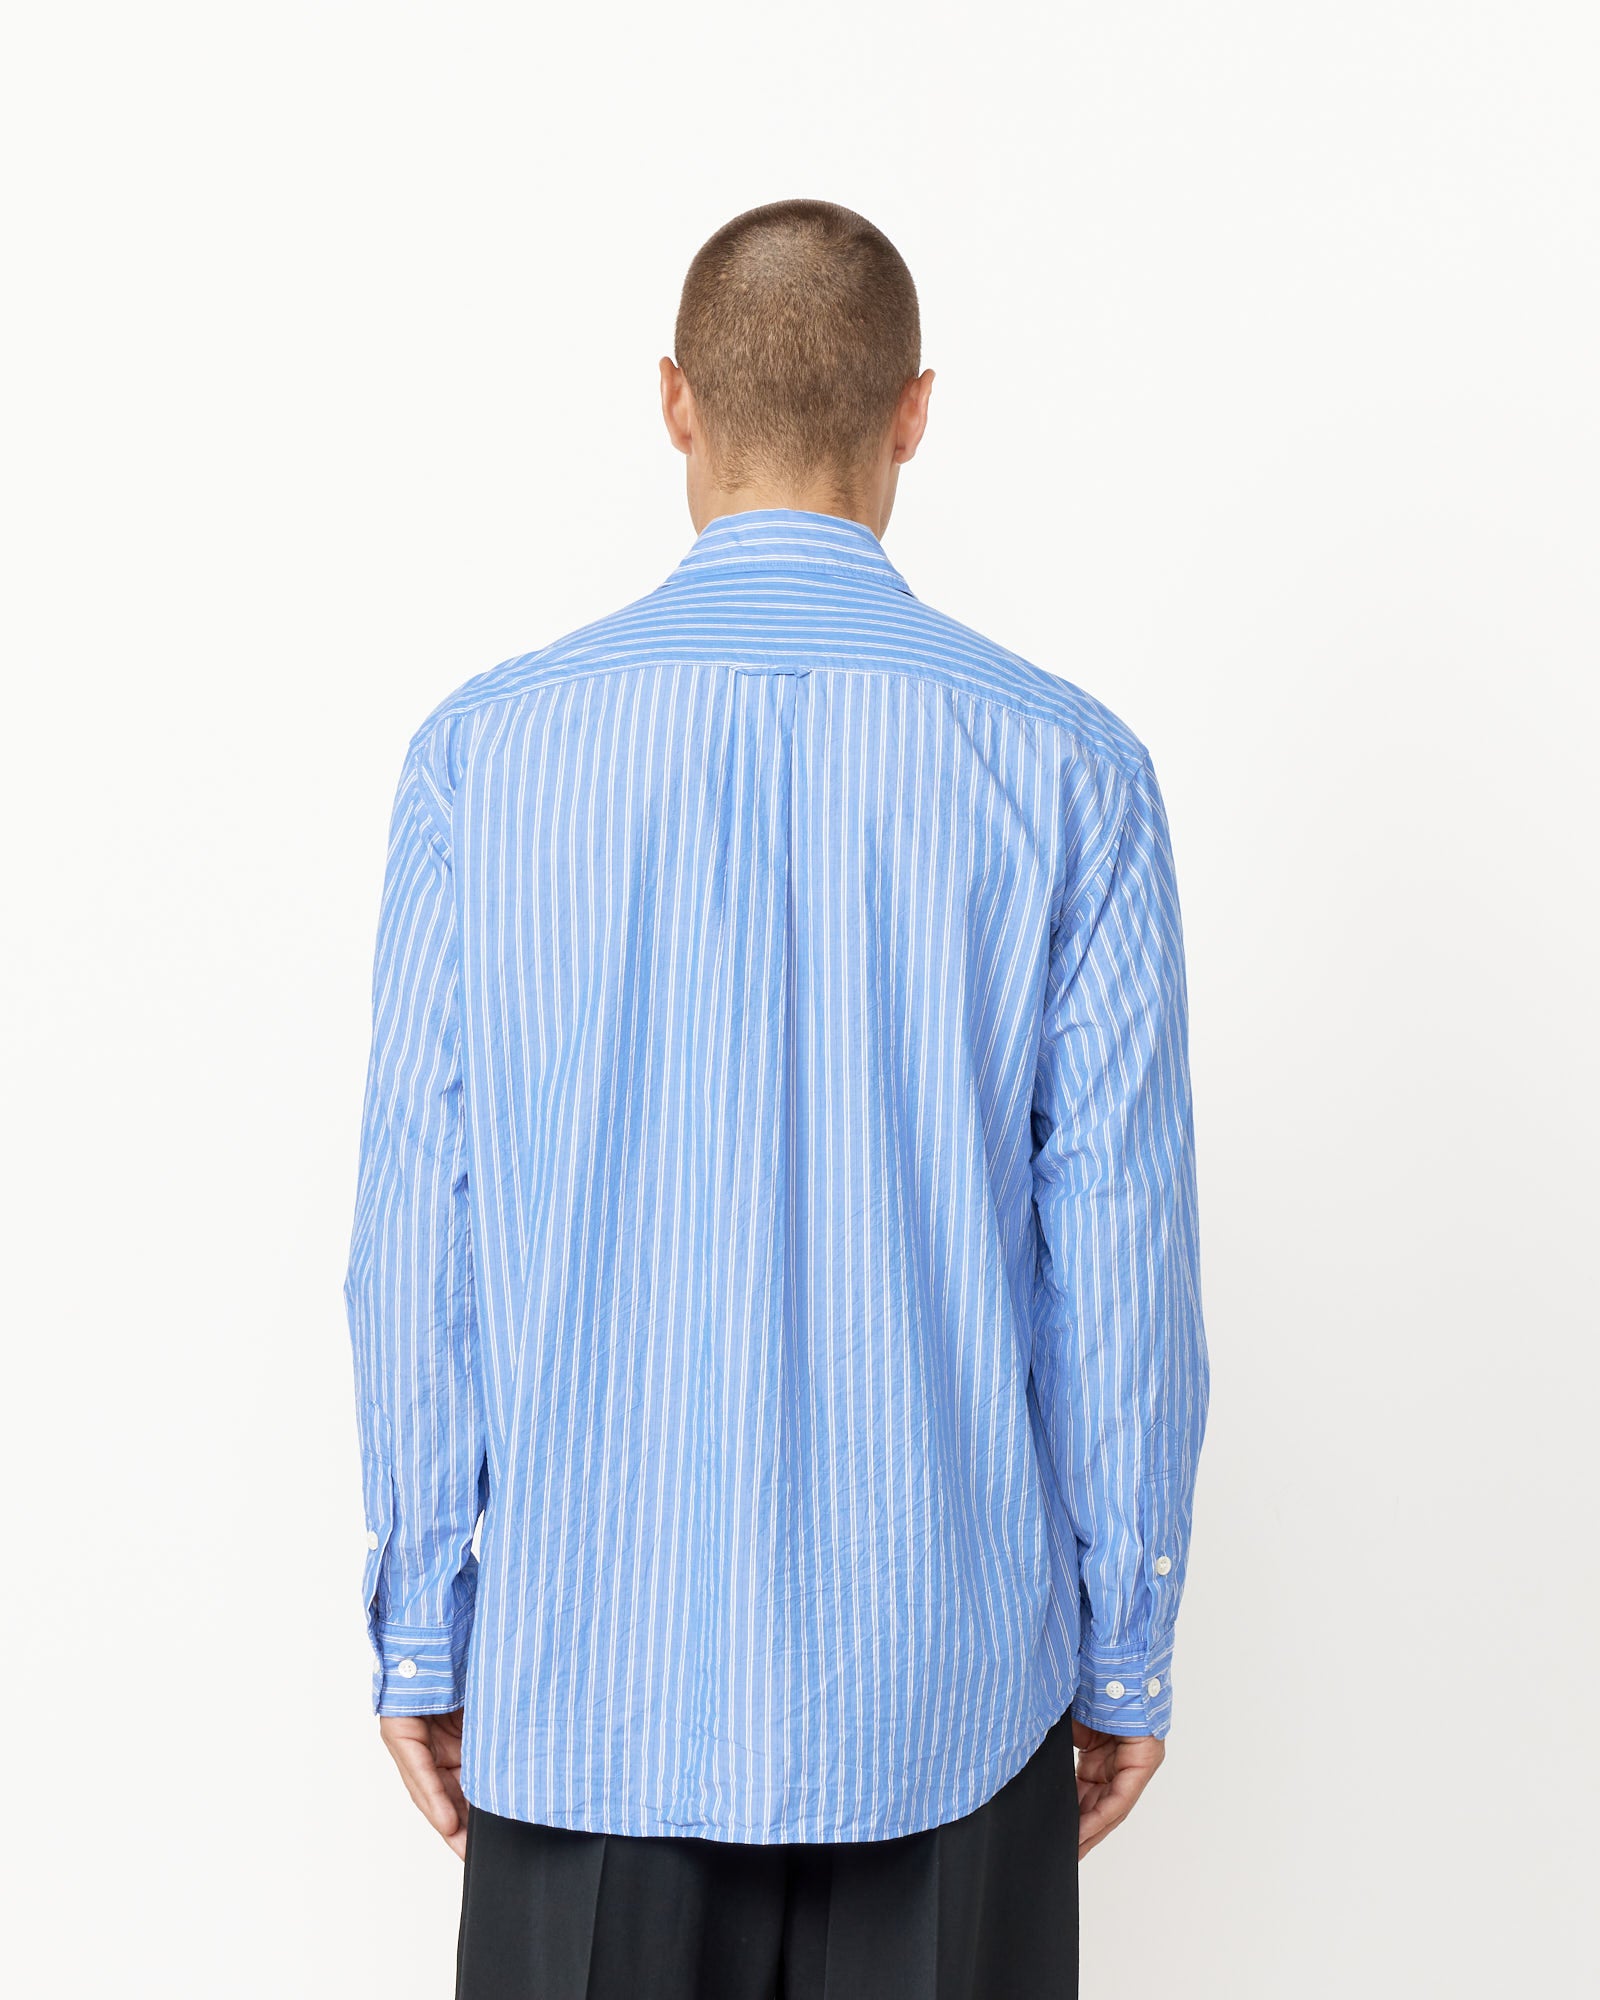 Gio Shirt Long Sleeve in Crushed Cotton Blue Stripe